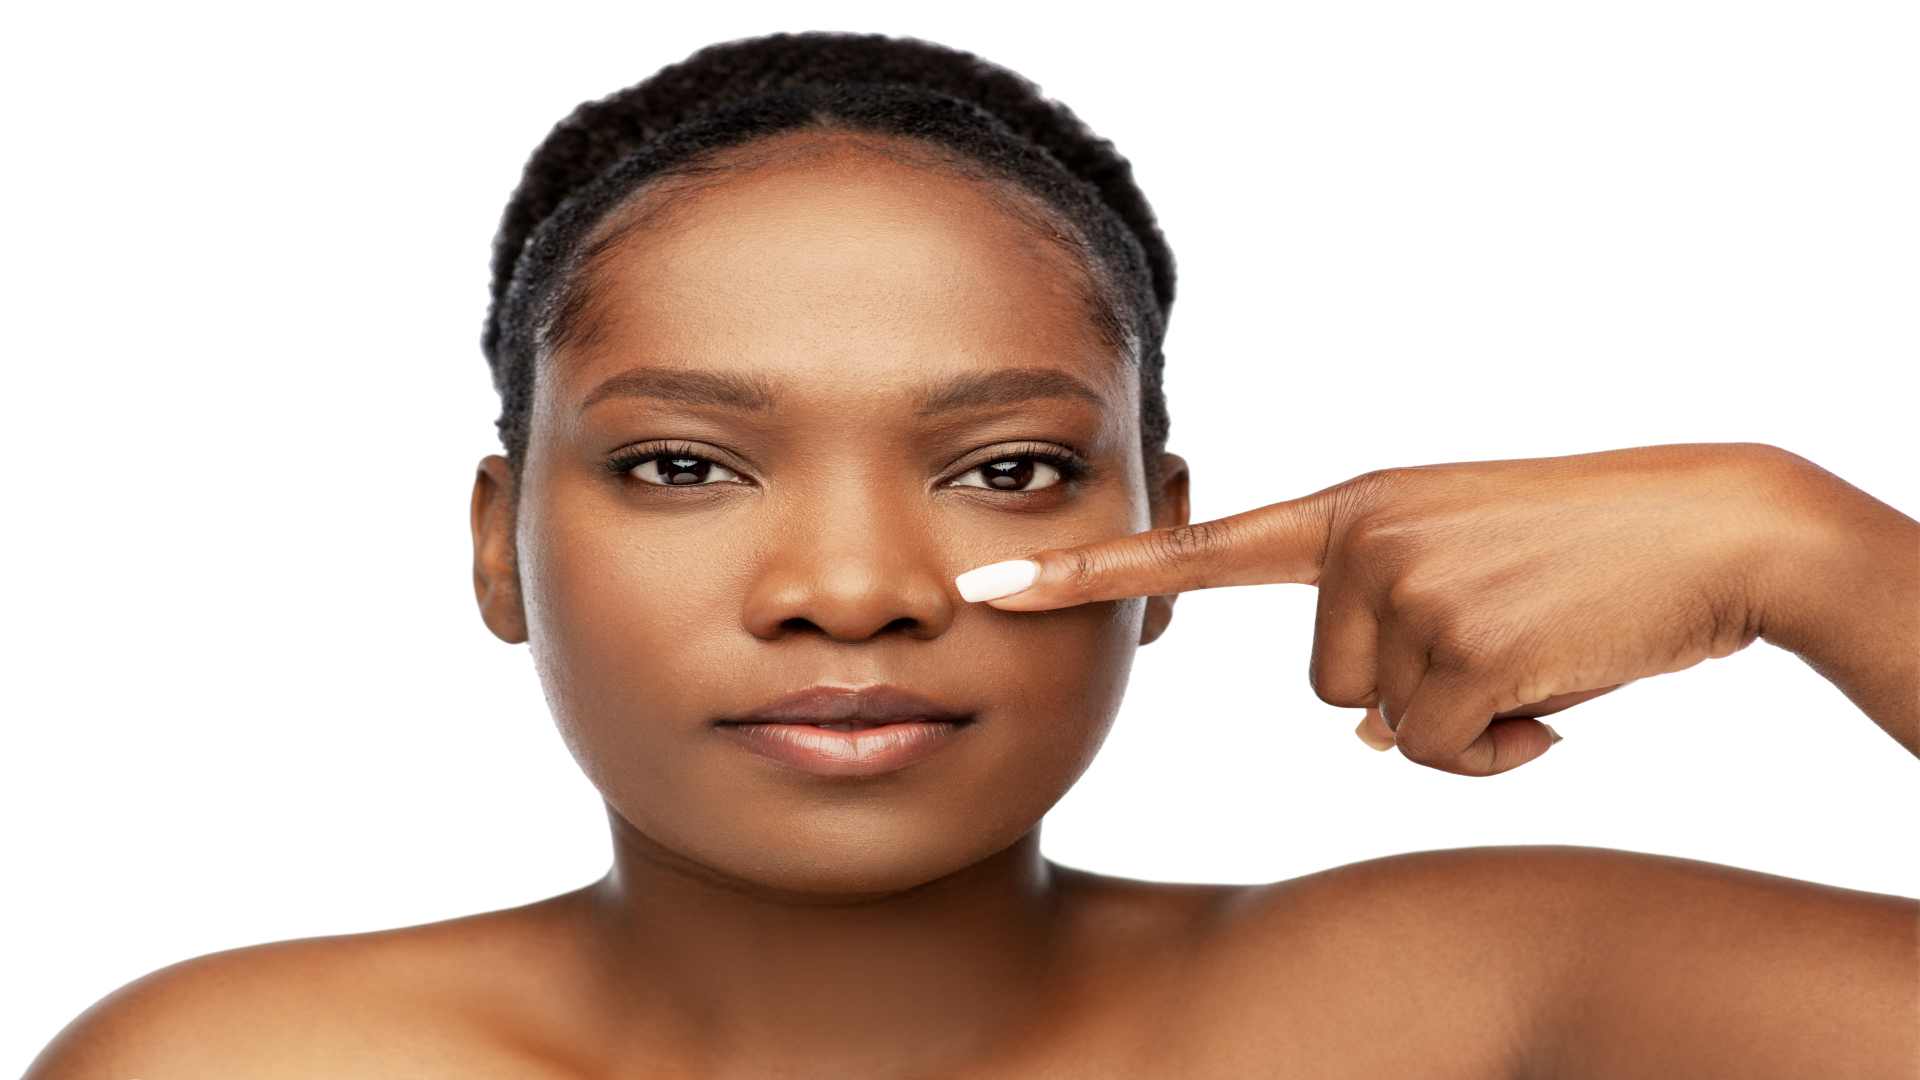 Treatments, Remedies, Tricks to Make your Nose Look Smaller